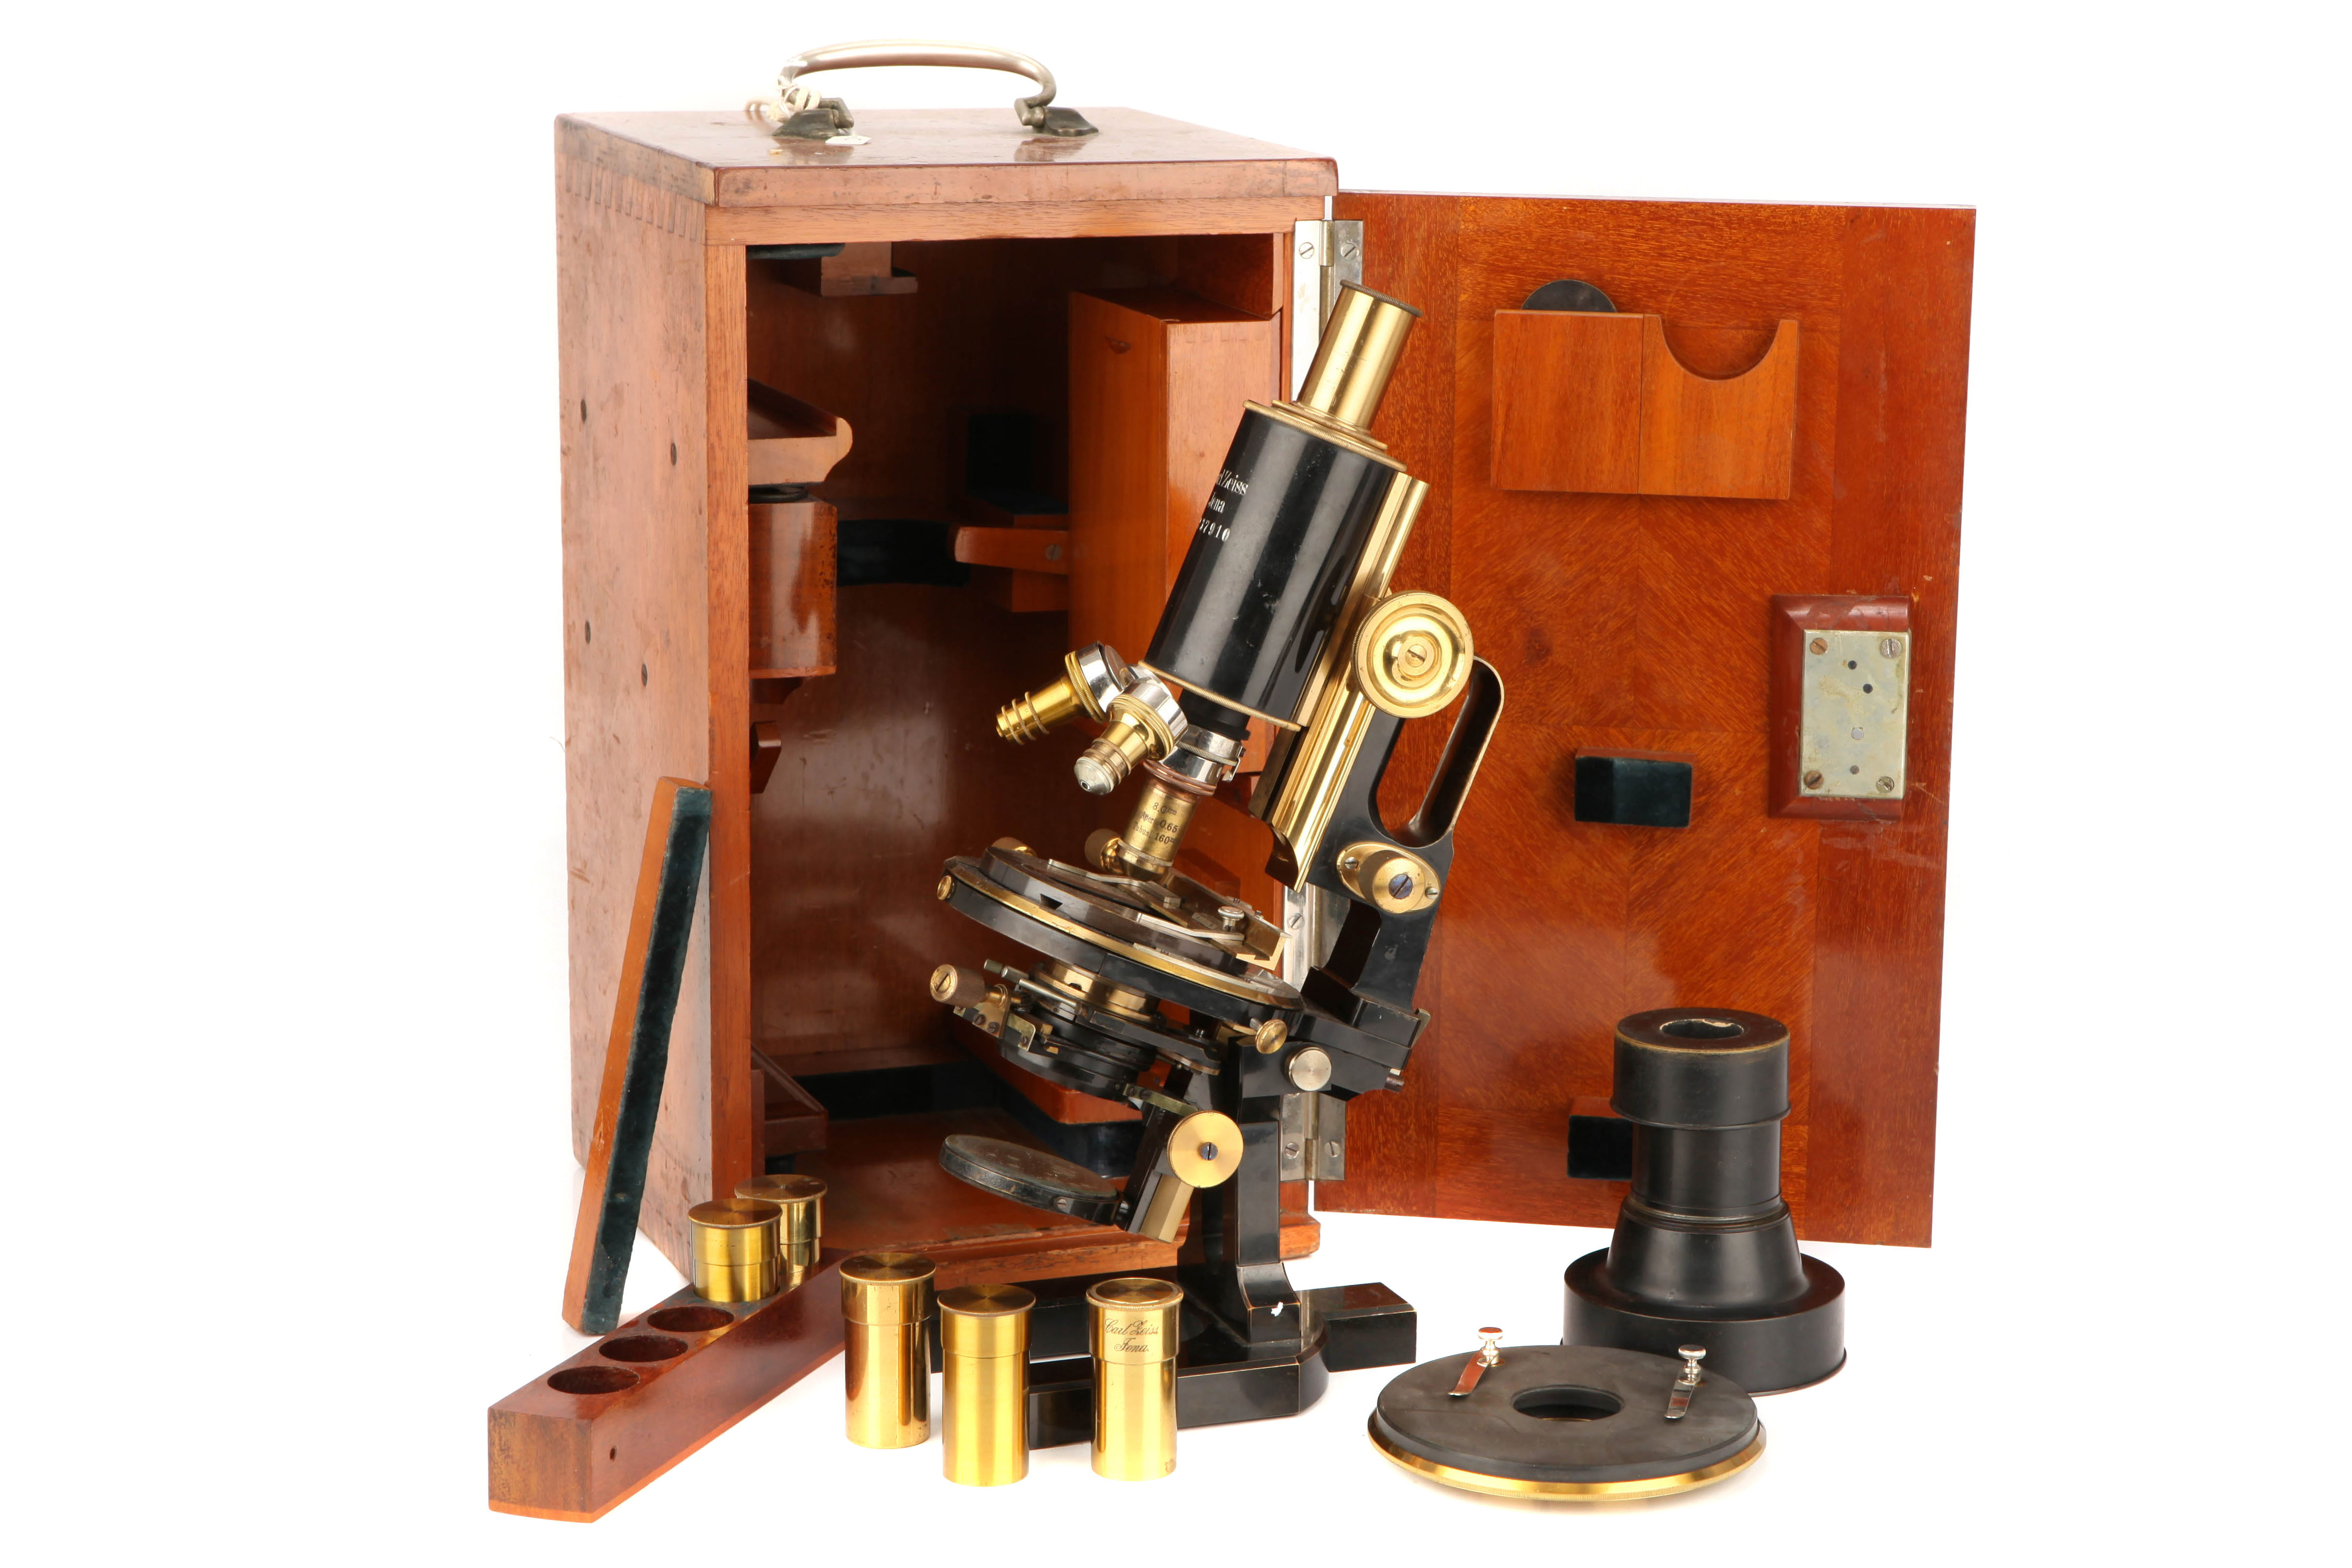 A Large Zeiss Ic Stand for Photomicrography,